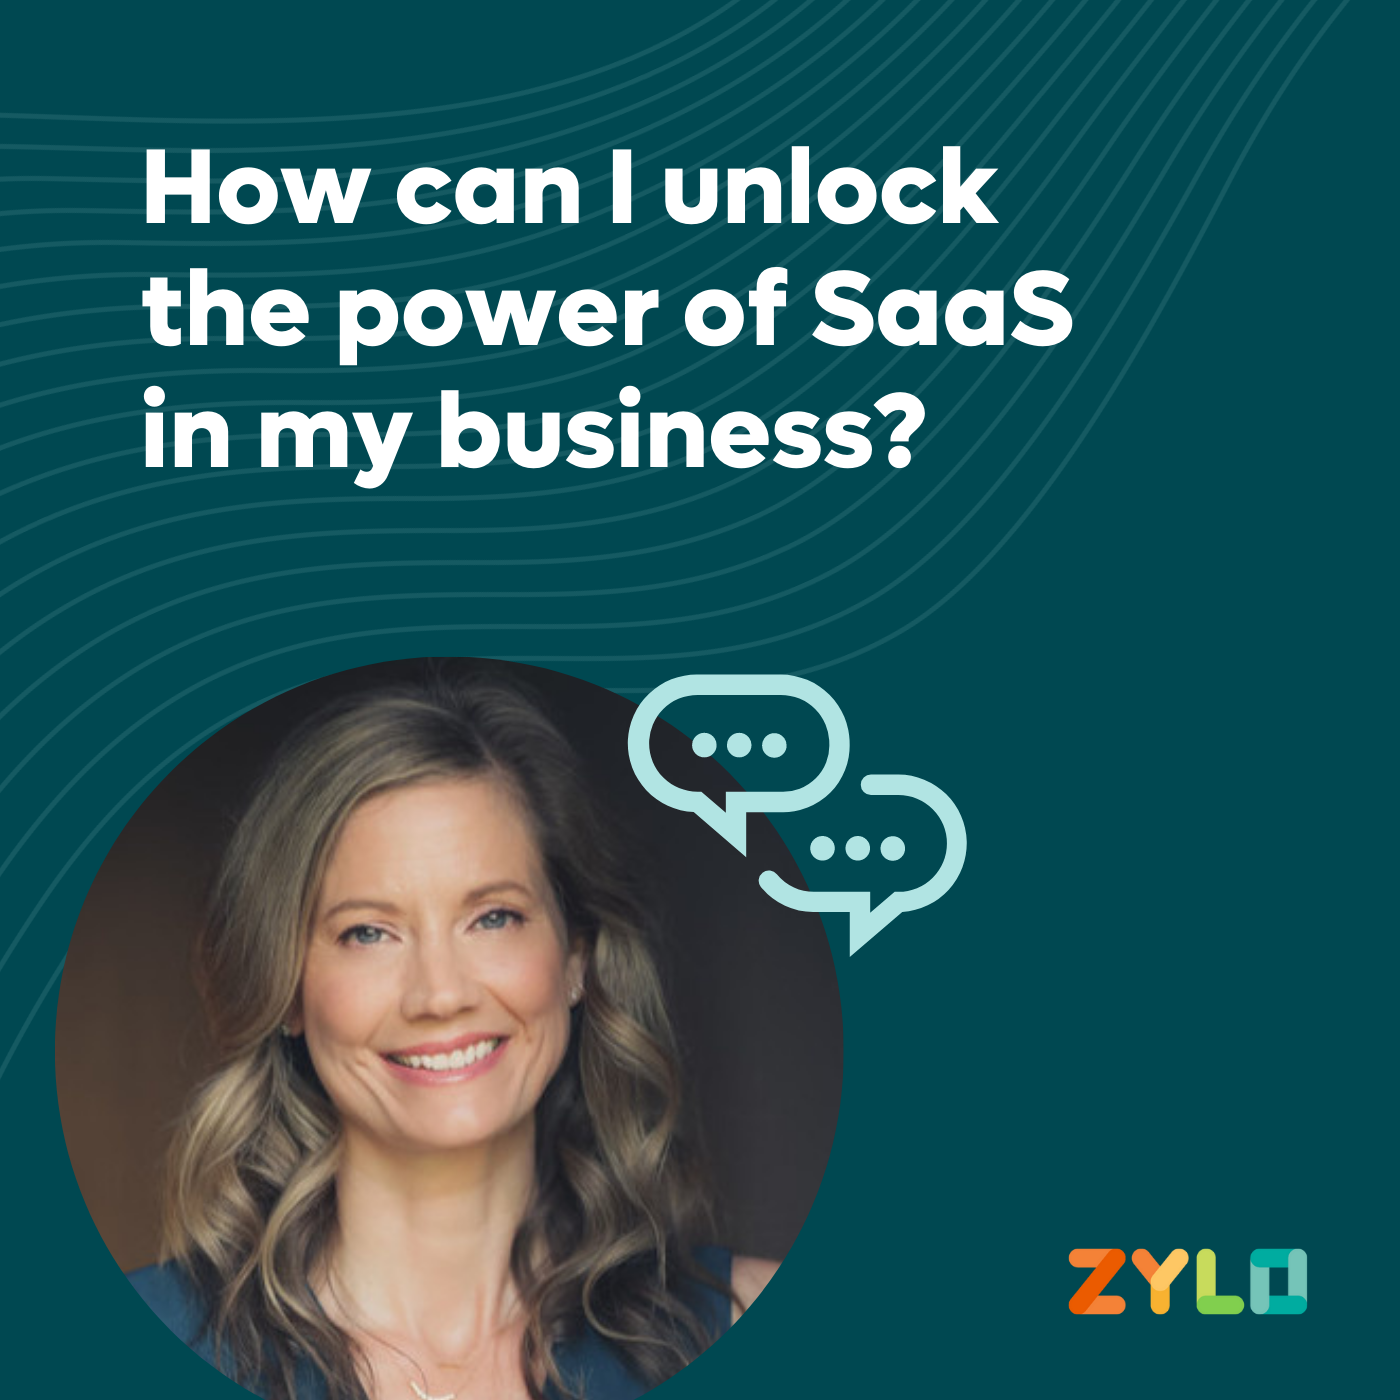 How can I unlock the power of SaaS in my business?